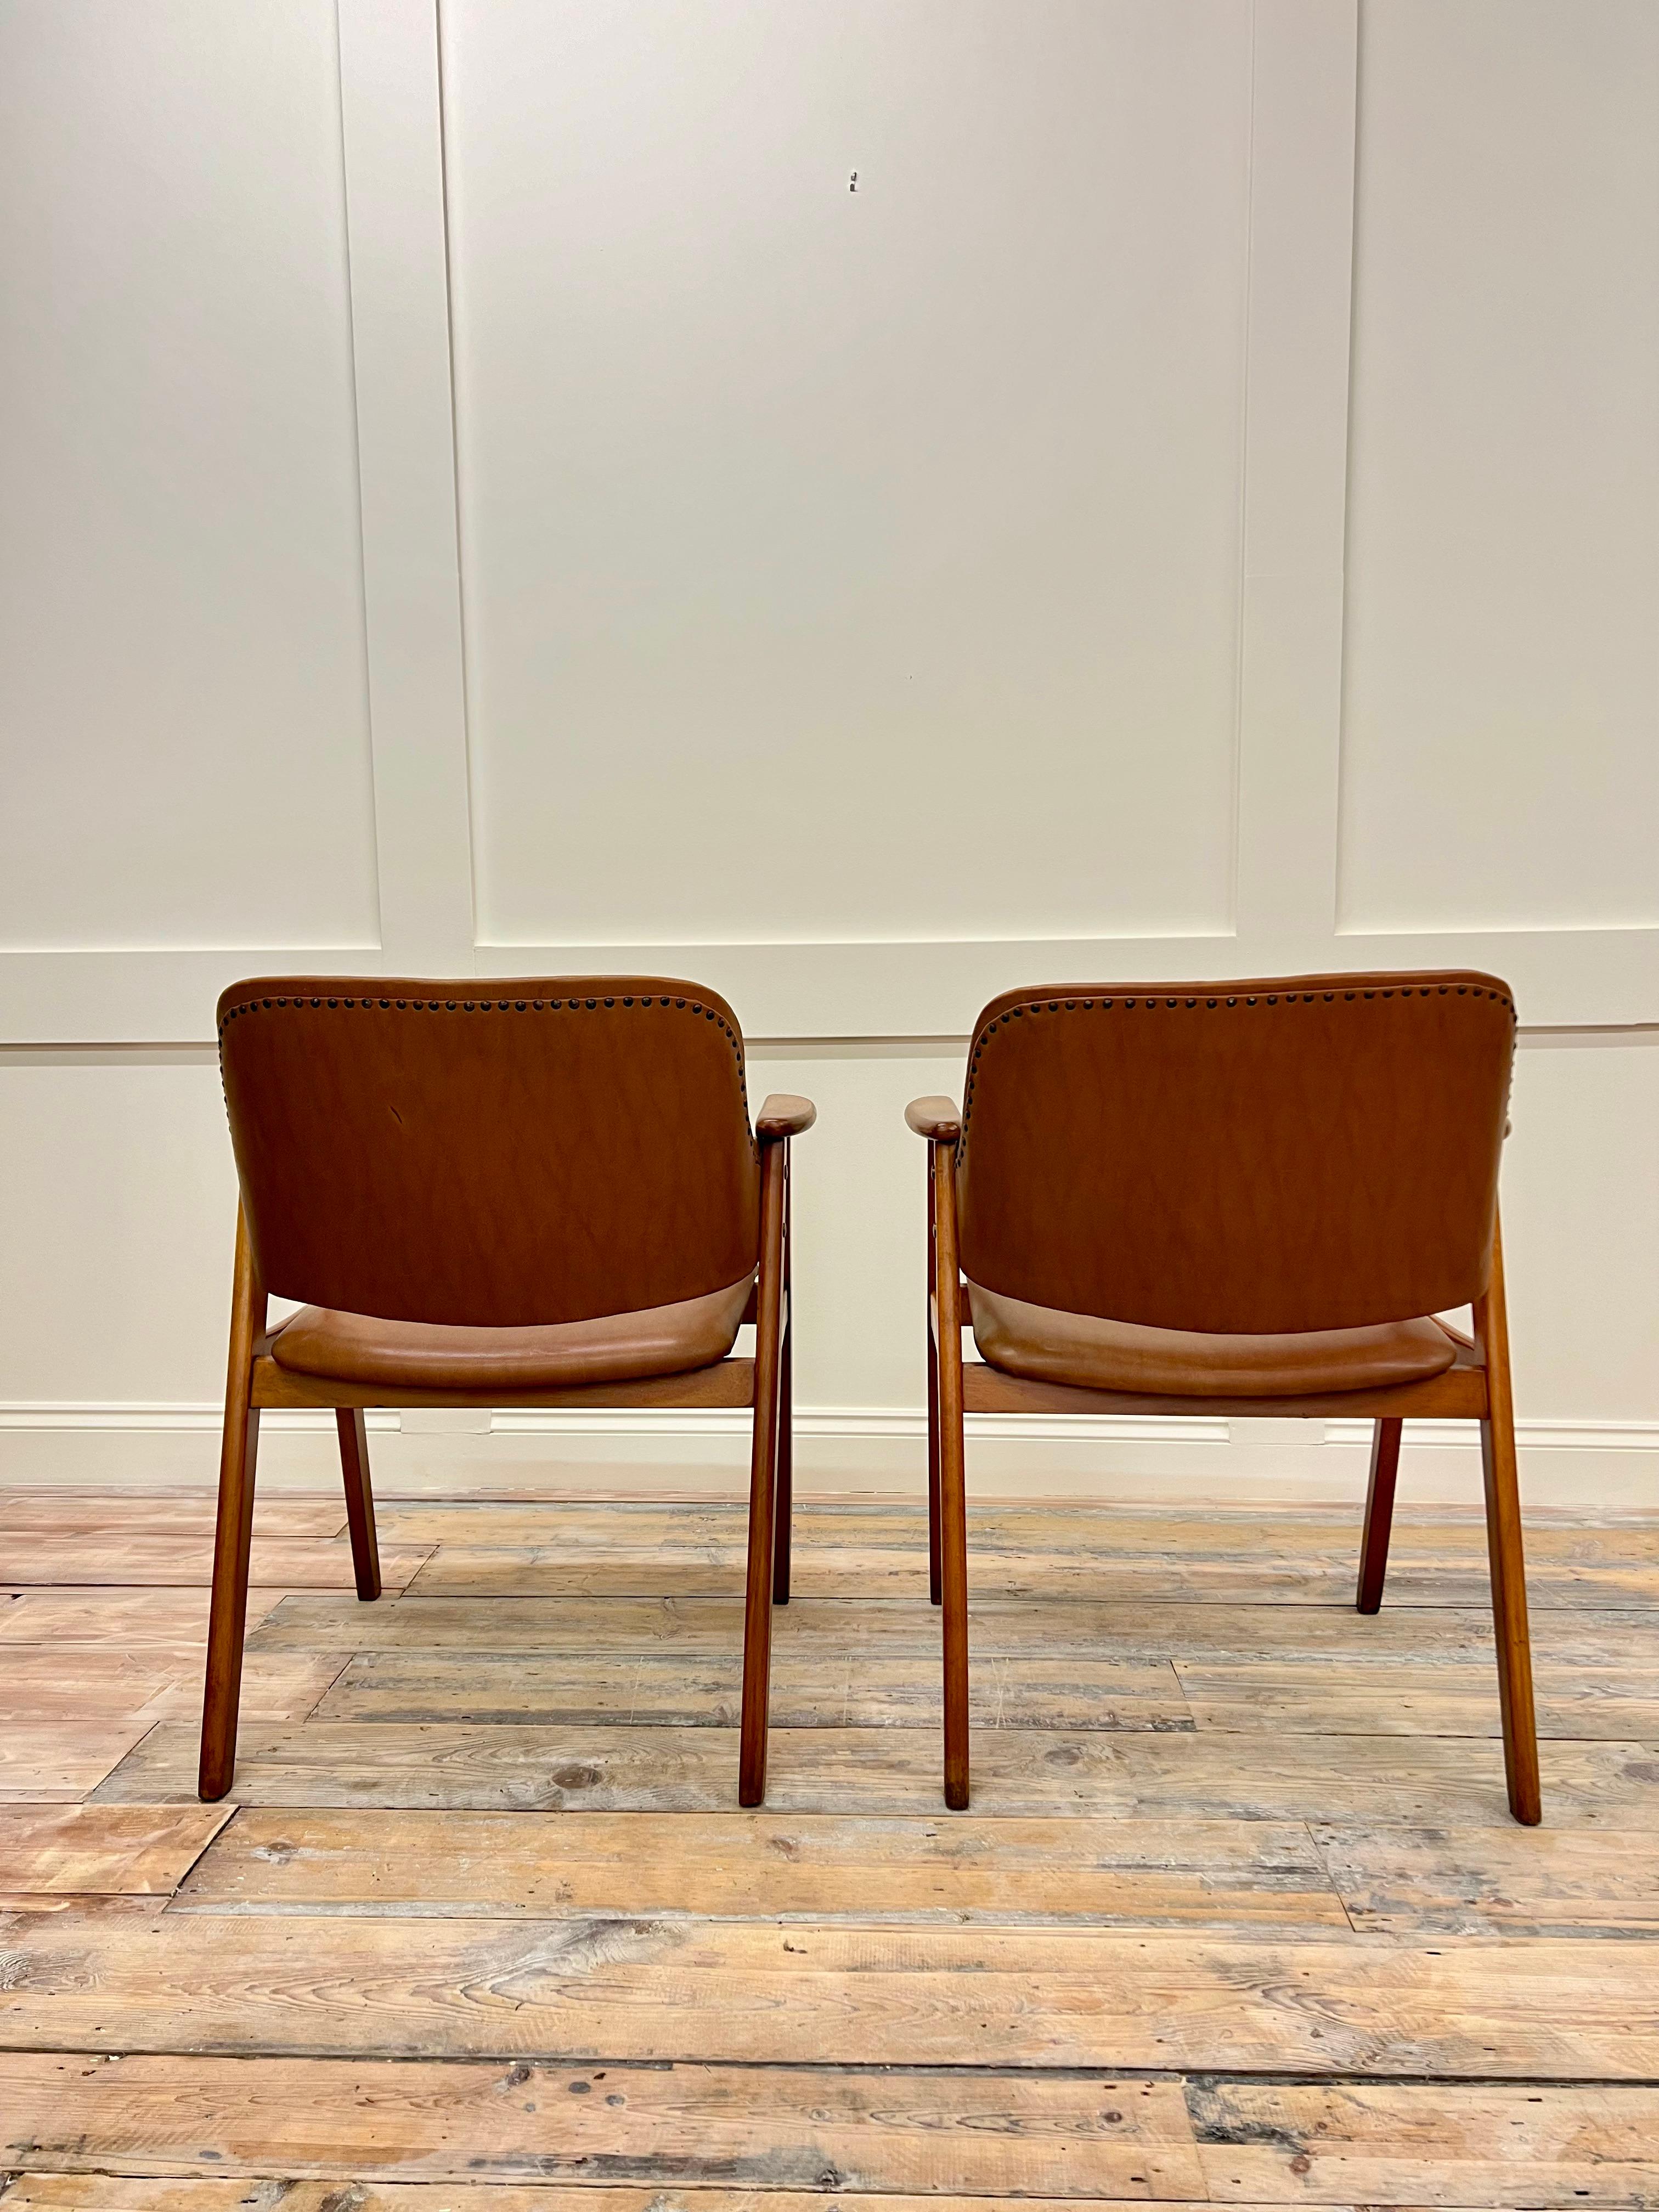 Mid-20th Century Set of 2 Midcentury Modern Dining Chairs by Cees Braakman for Pastoe, c.1950s